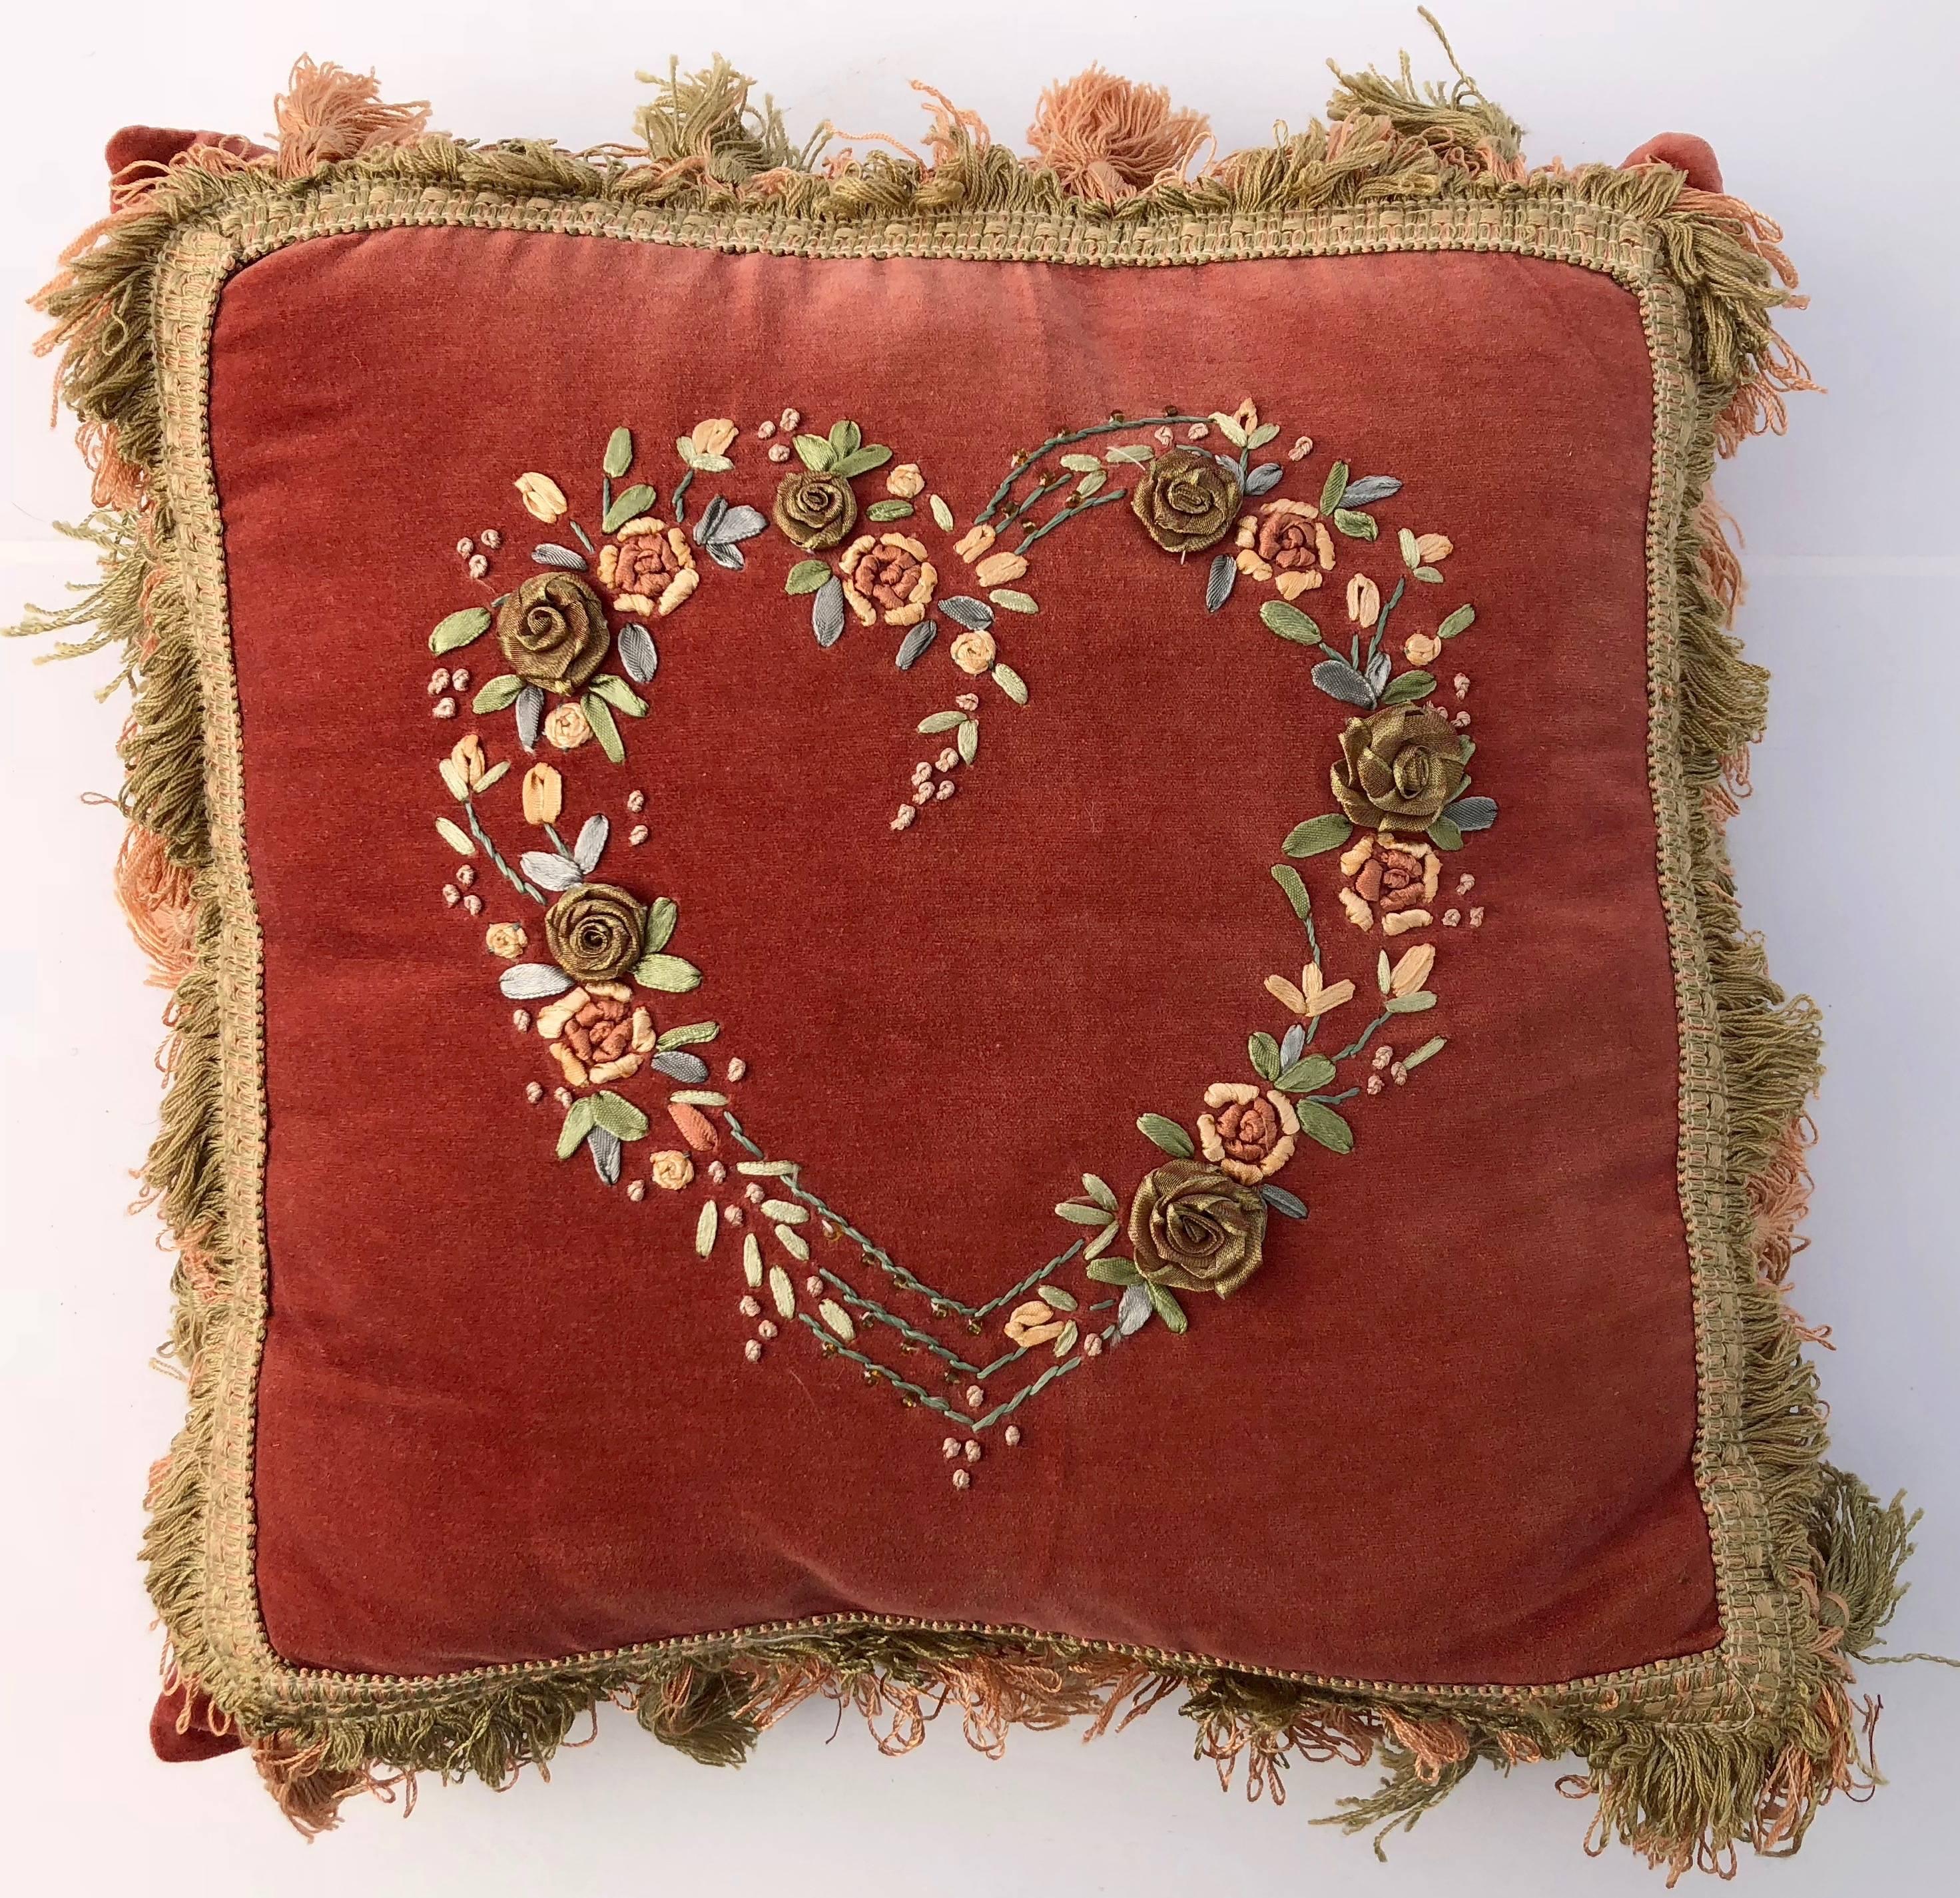 Embroidered Vintage Velvet Ribbon Art Pillows, Floral, Heart and Wreath Designs, Set of Five For Sale